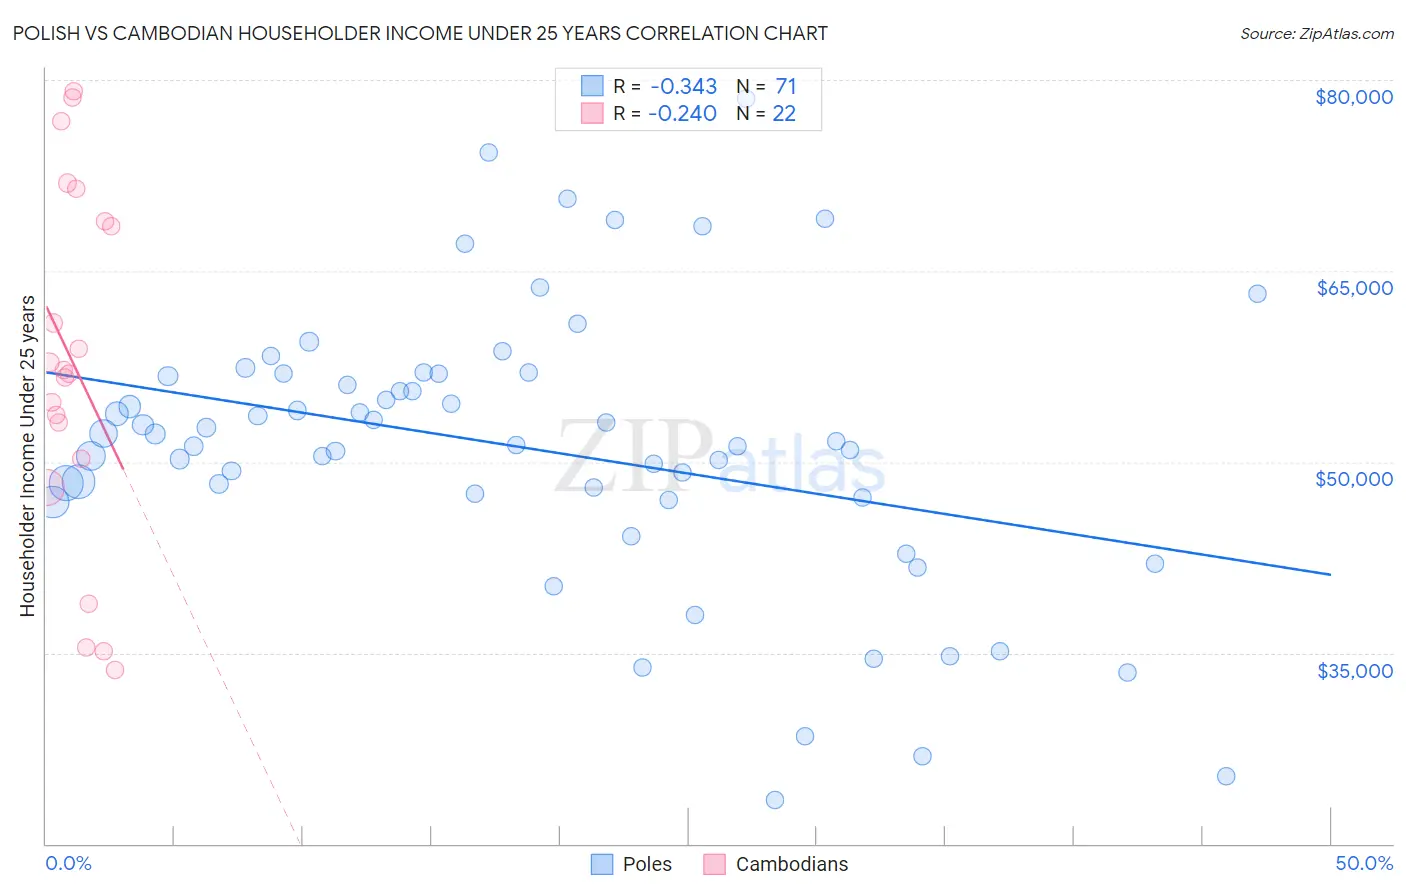 Polish vs Cambodian Householder Income Under 25 years